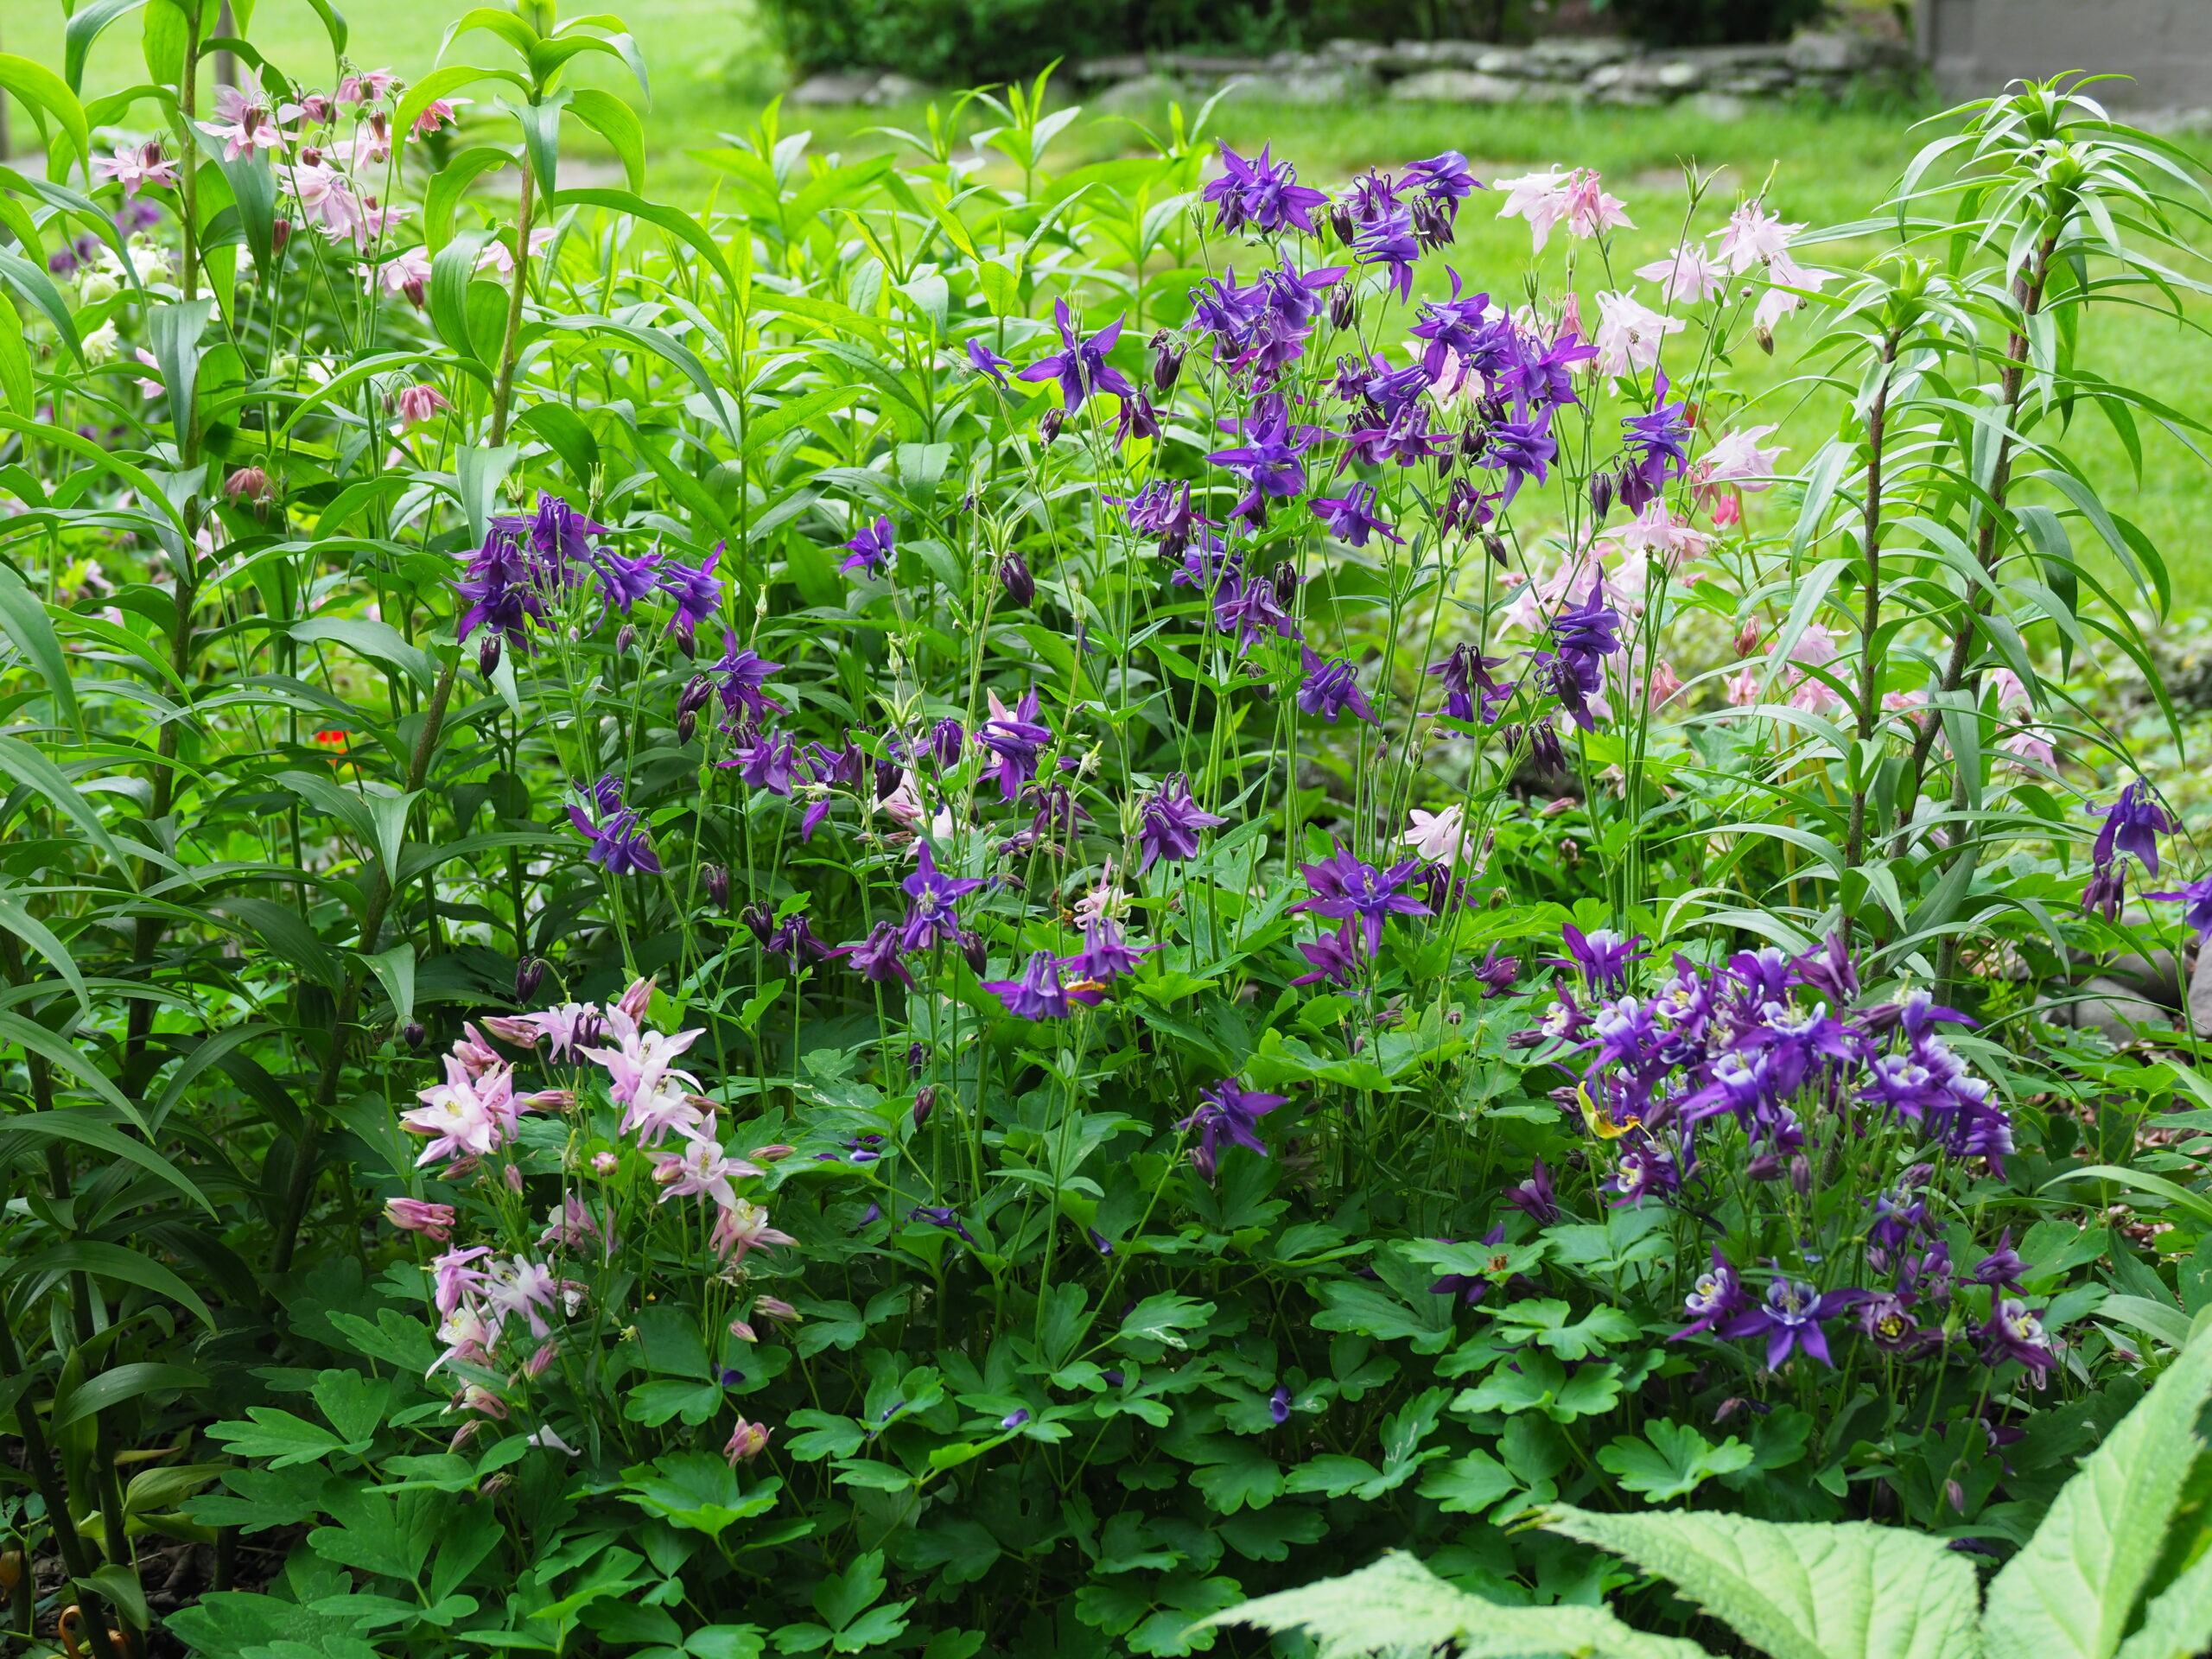 Adding splashes of color and height to the May garden are a number of unexpected columbines of mixed parentage. Some are single colors while others are bicolored. Note the long spurs behind the purple flowers while the bicolored ones have short spurs. The spurs actually contain the nectaries that hummingbird adore. ANDREW MESSINGER